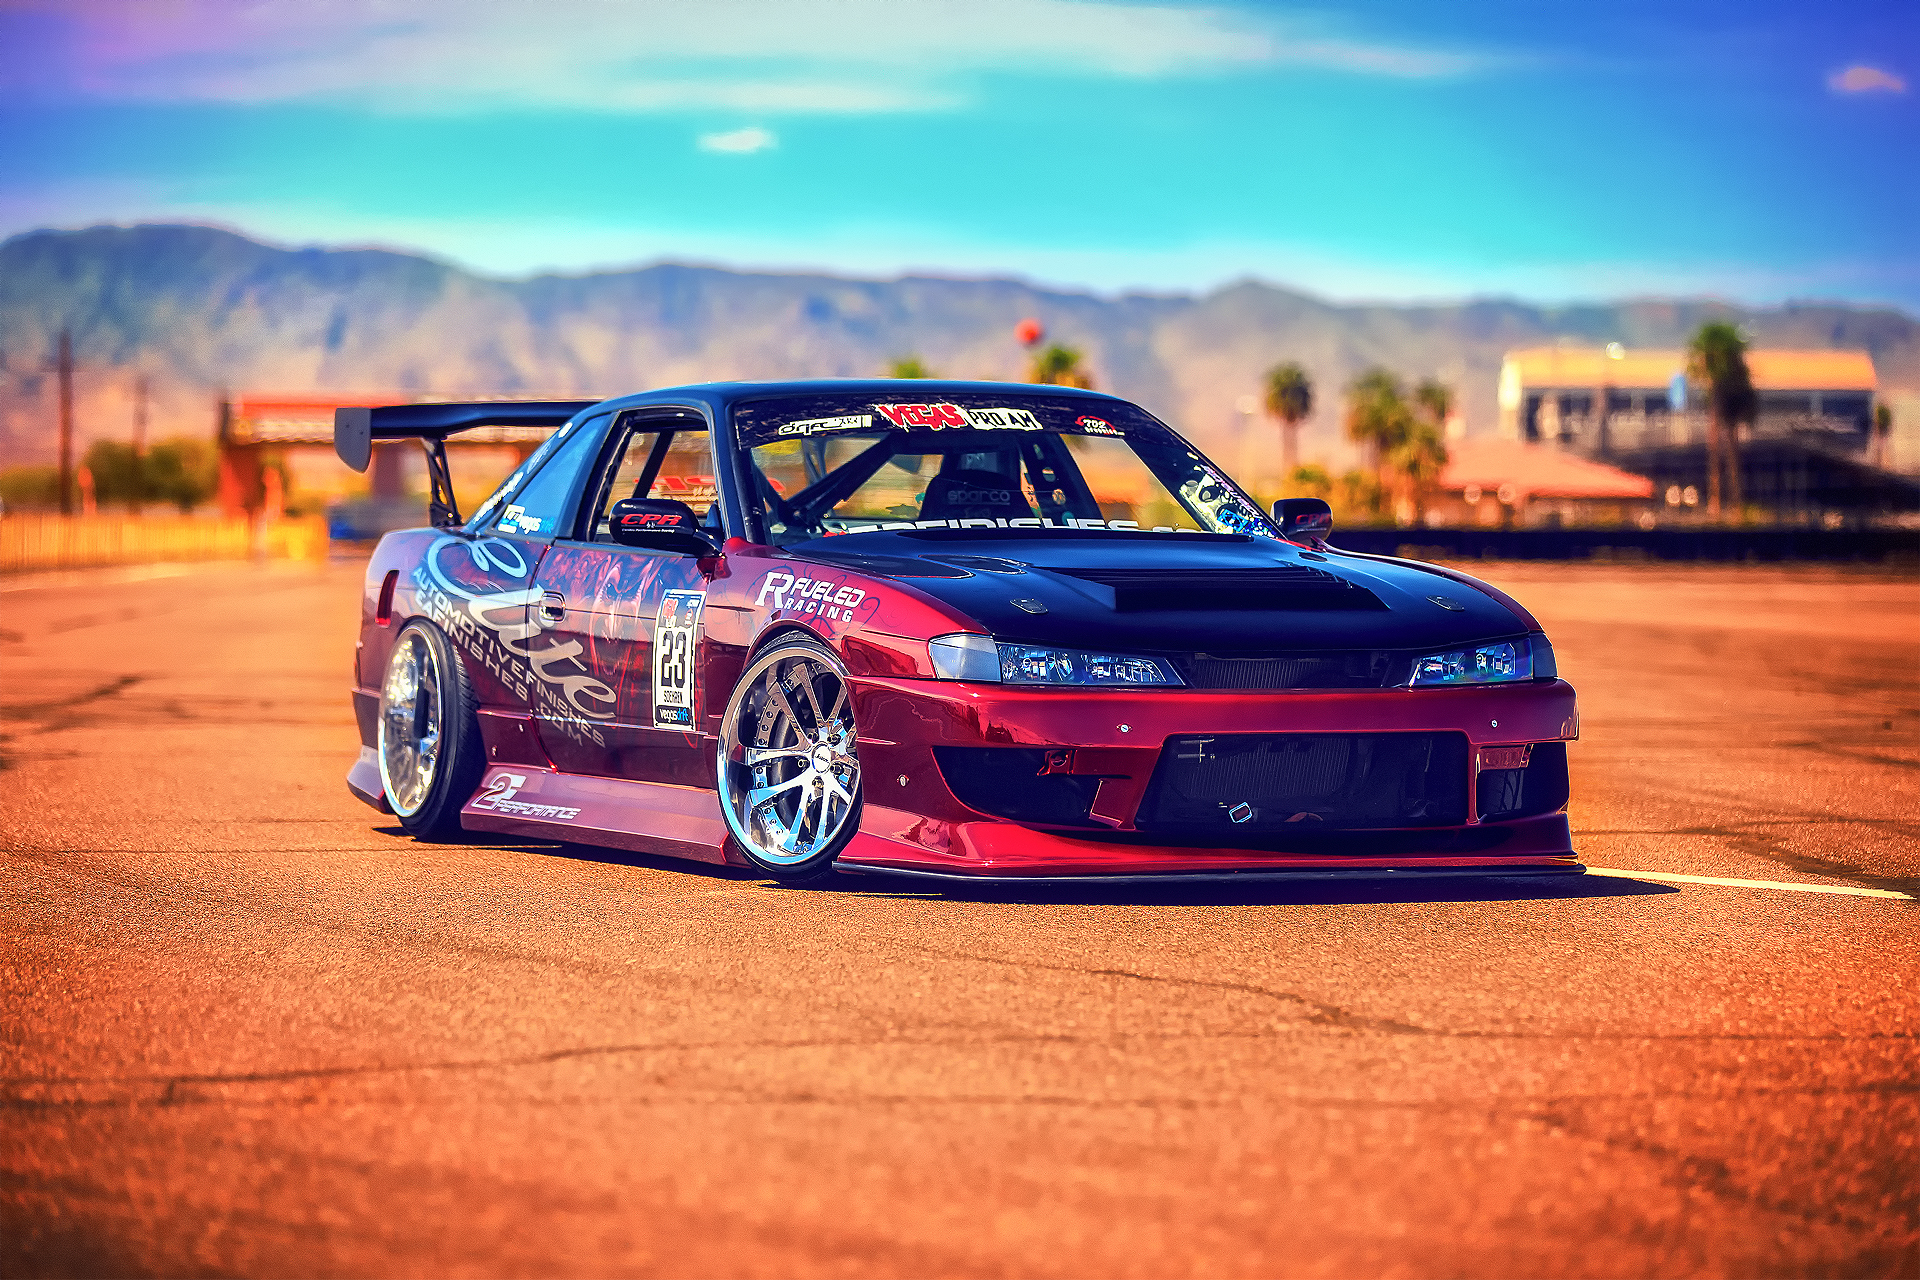 Free Download Nissan Silvia S14 Drift Tuning G Wallpaper 19x1280 1750 19x1280 For Your Desktop Mobile Tablet Explore 43 Nissan Silvia Wallpaper Nissan Silvia Wallpaper Nissan Silvia S15 Wallpaper